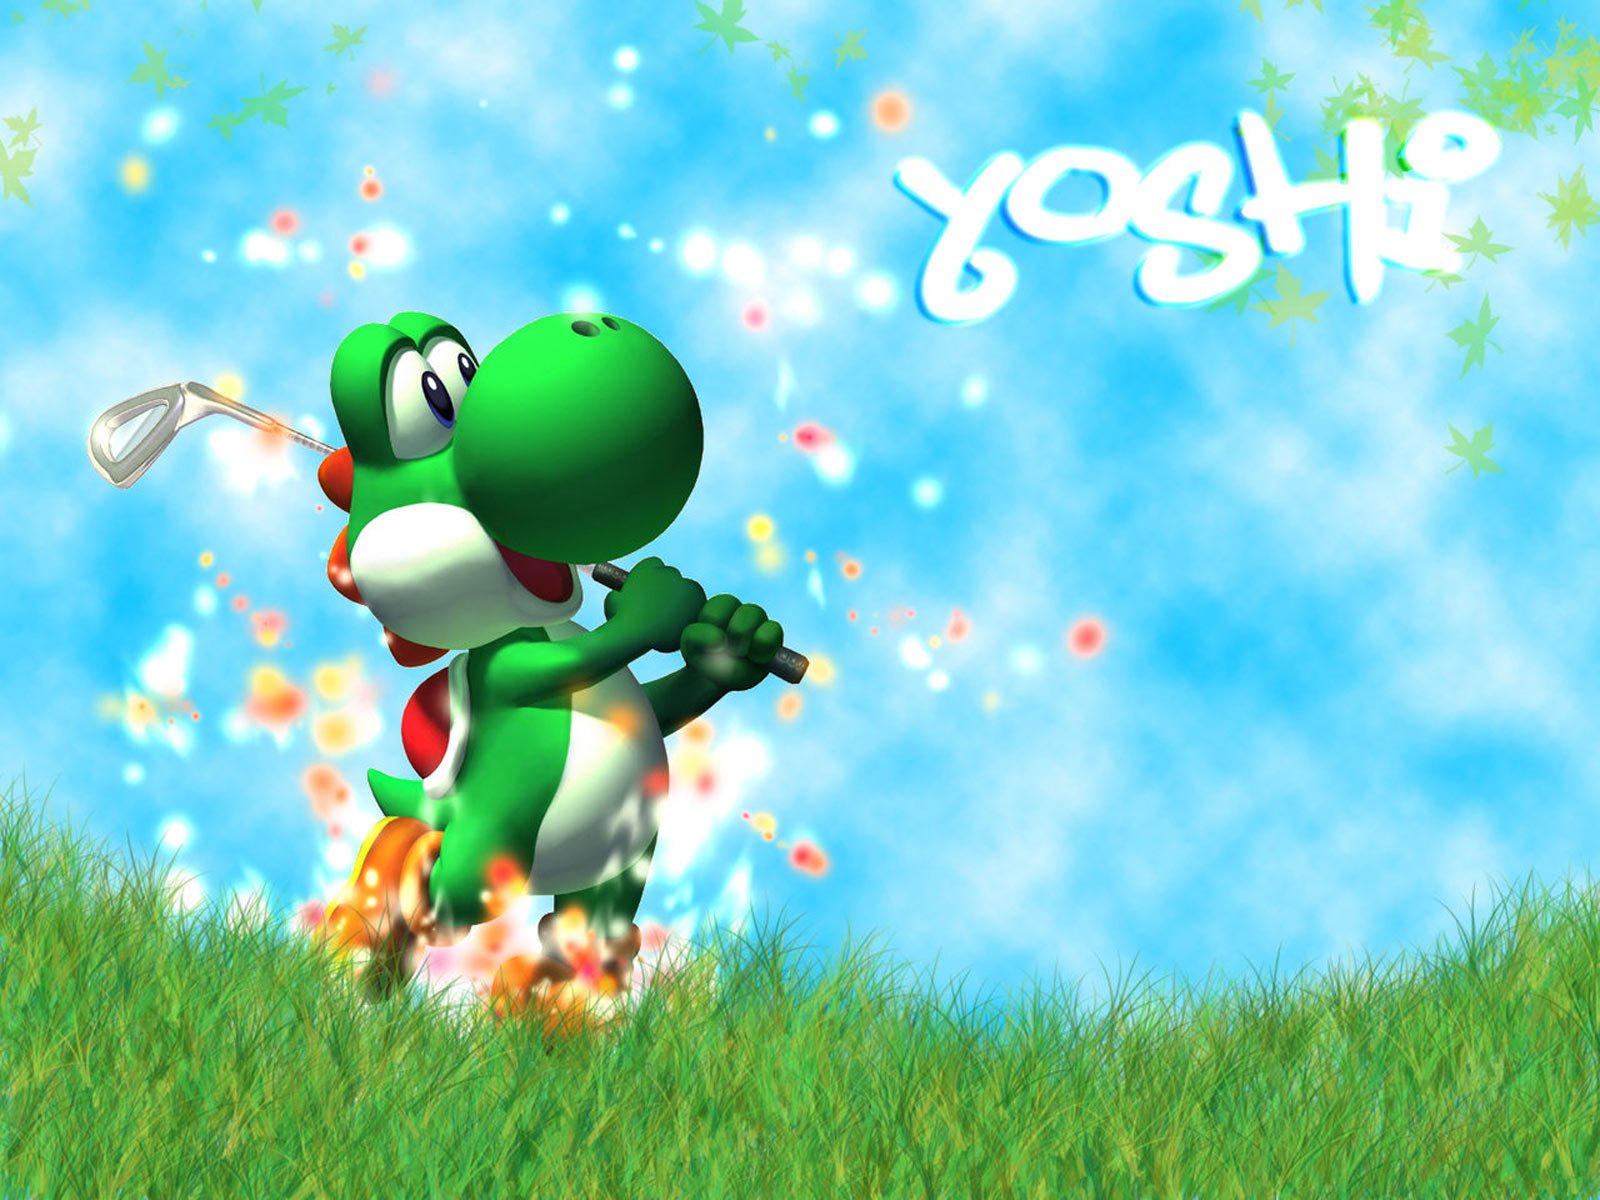 44 Yoshi HD Wallpapers | Backgrounds - Wallpaper Abyss